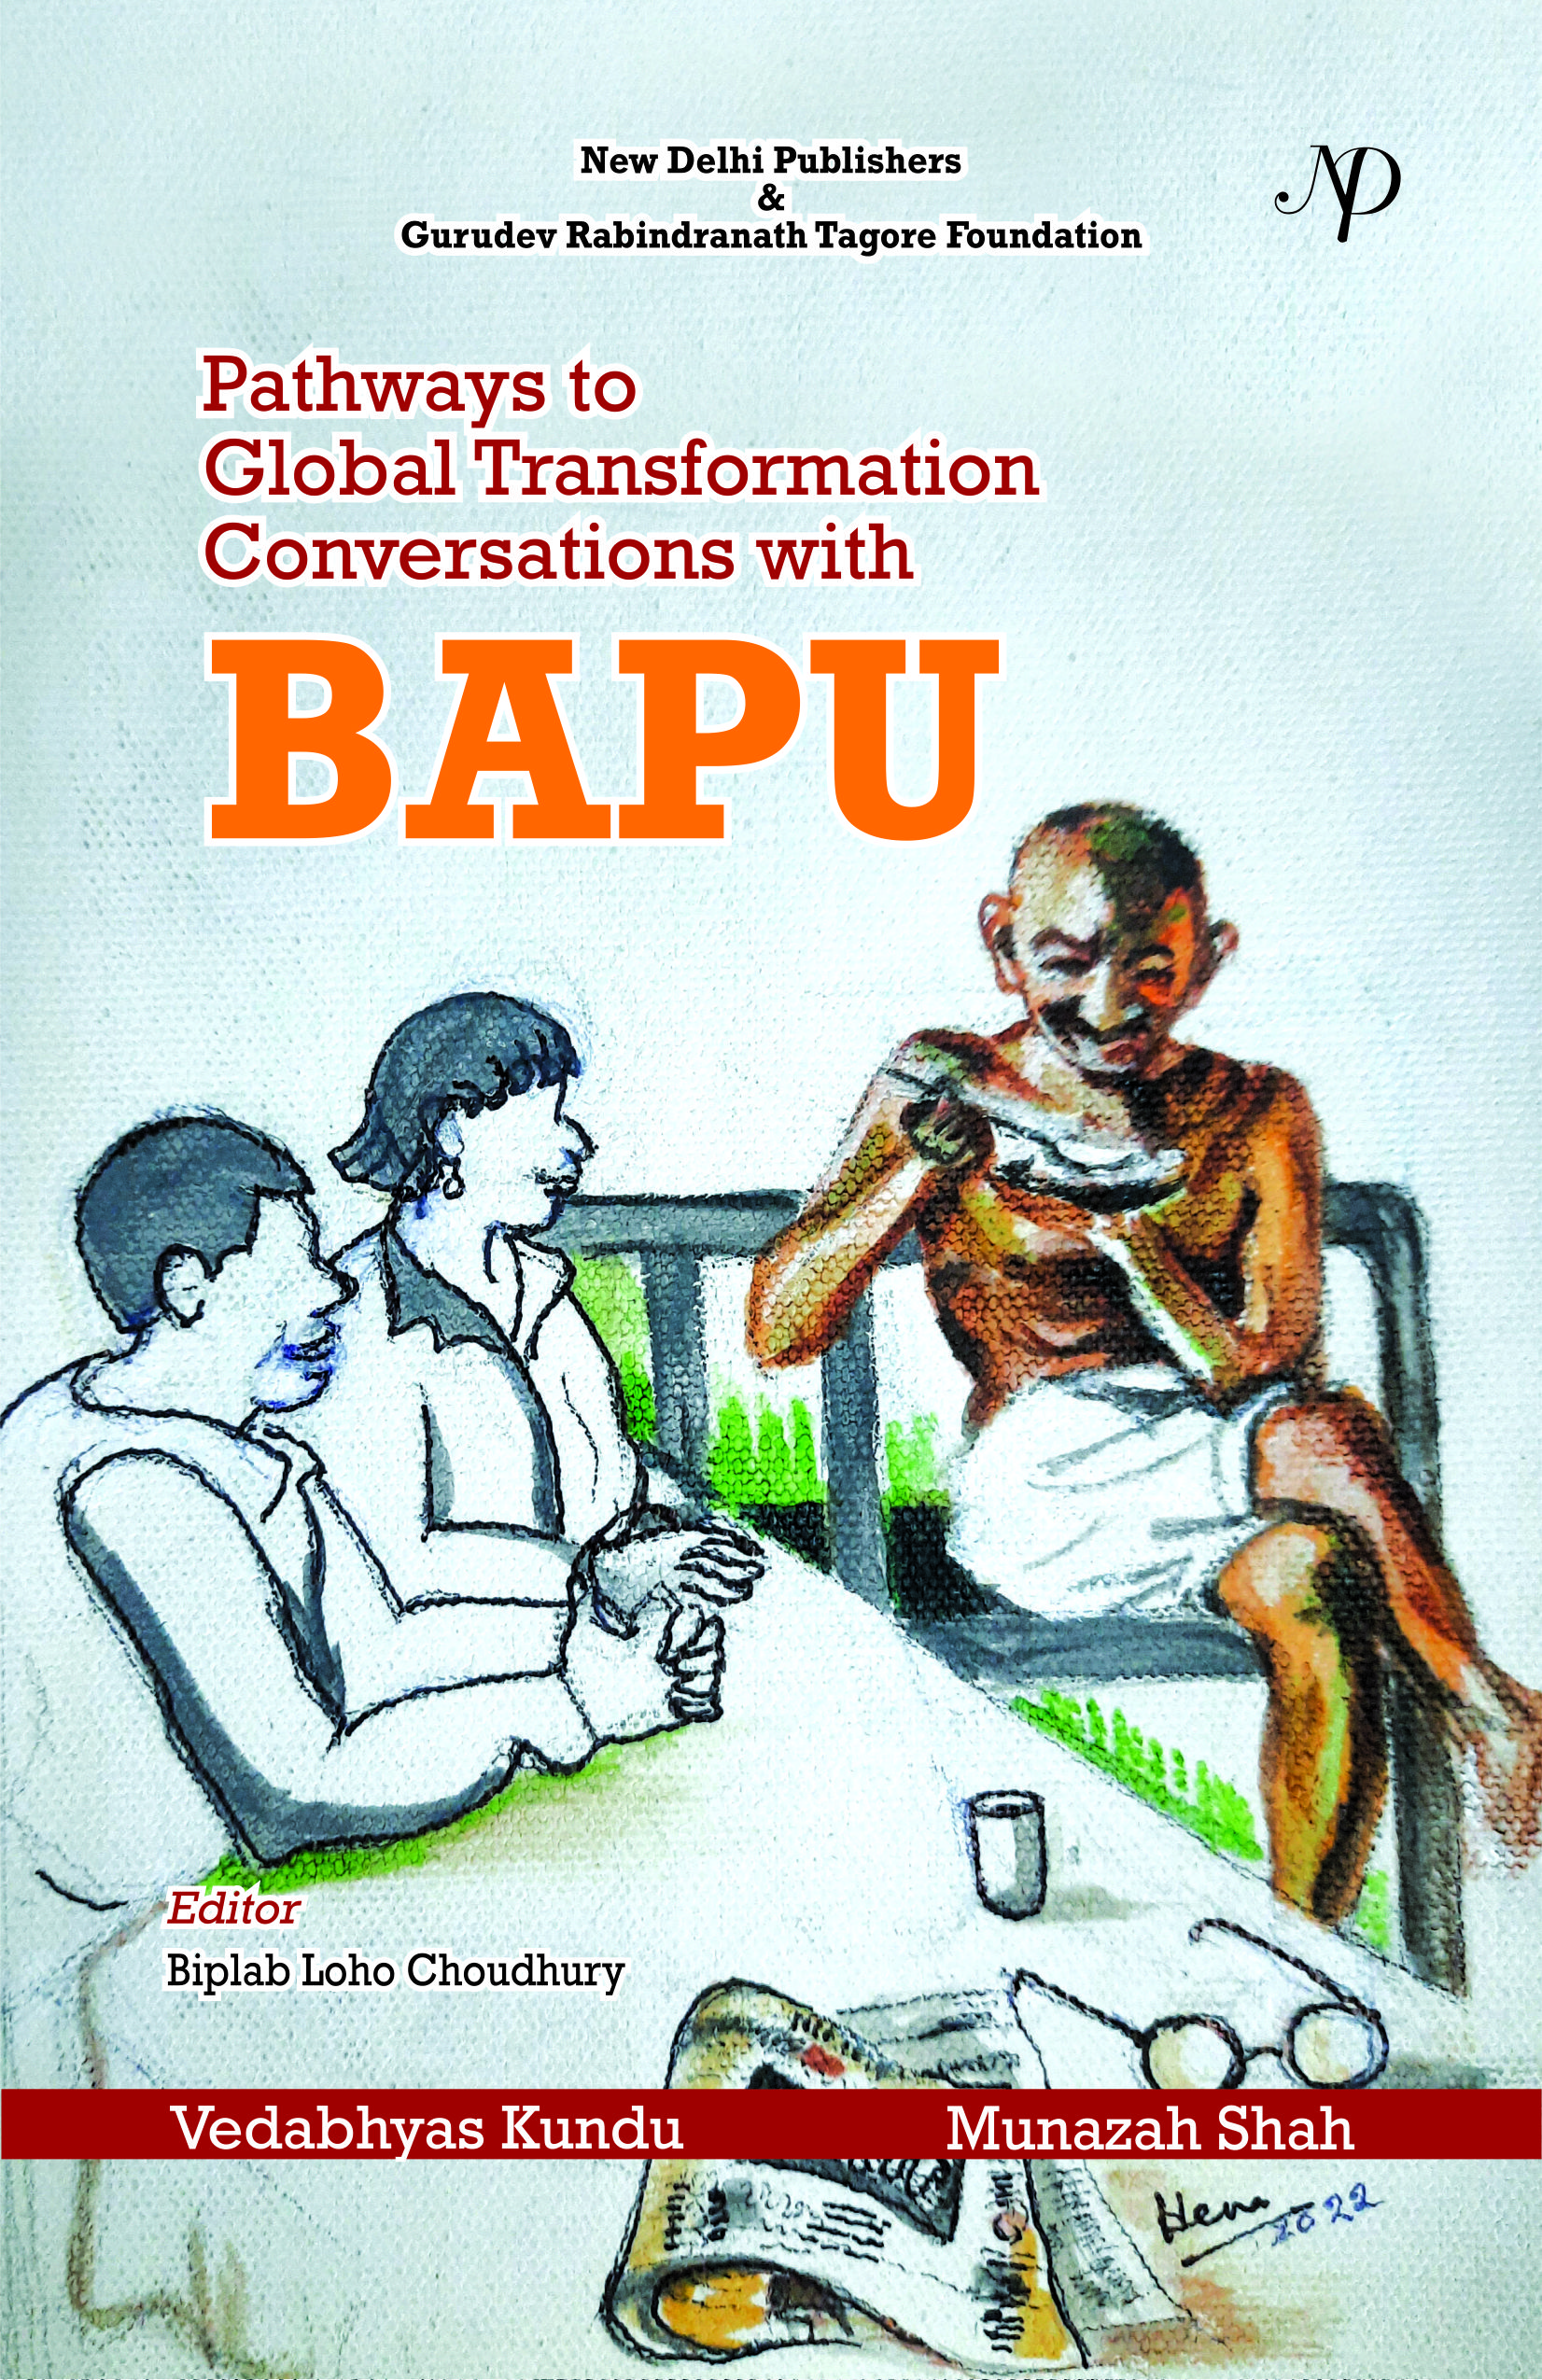 Pathways to Global Transformation Conversations with BAPU